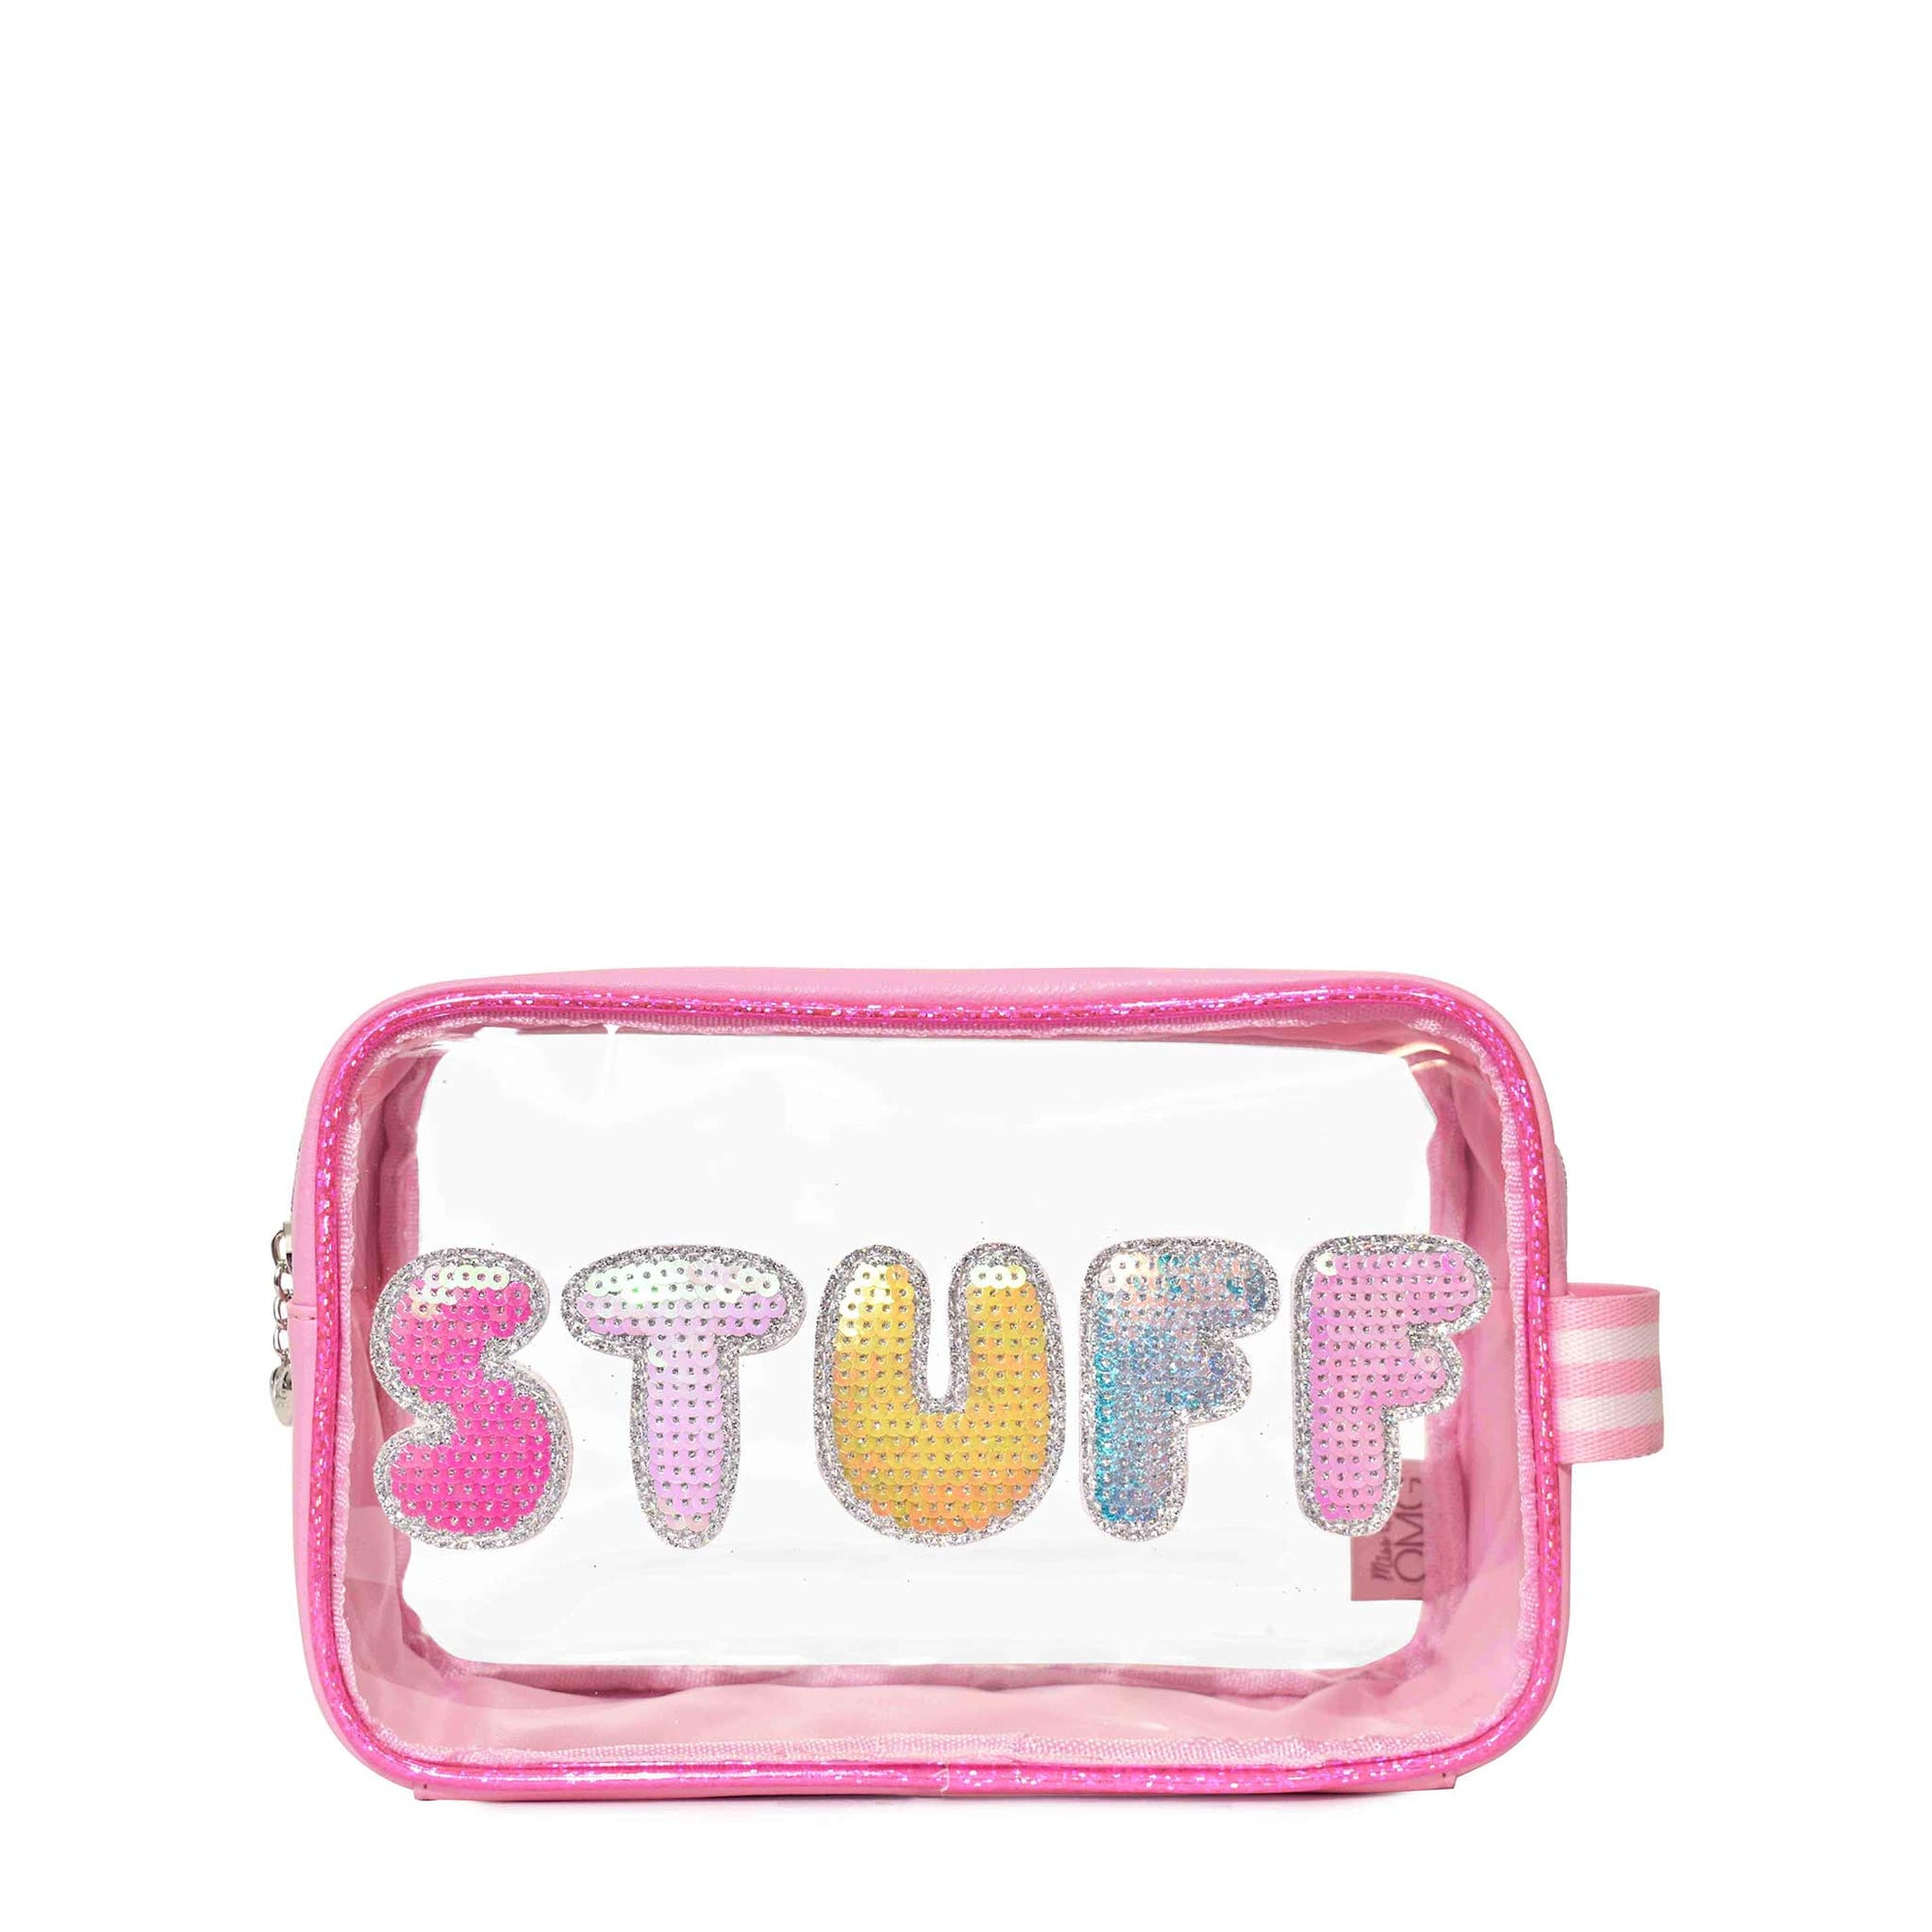 OMG Accessories 'Stuff' Sequin Clear Pouch